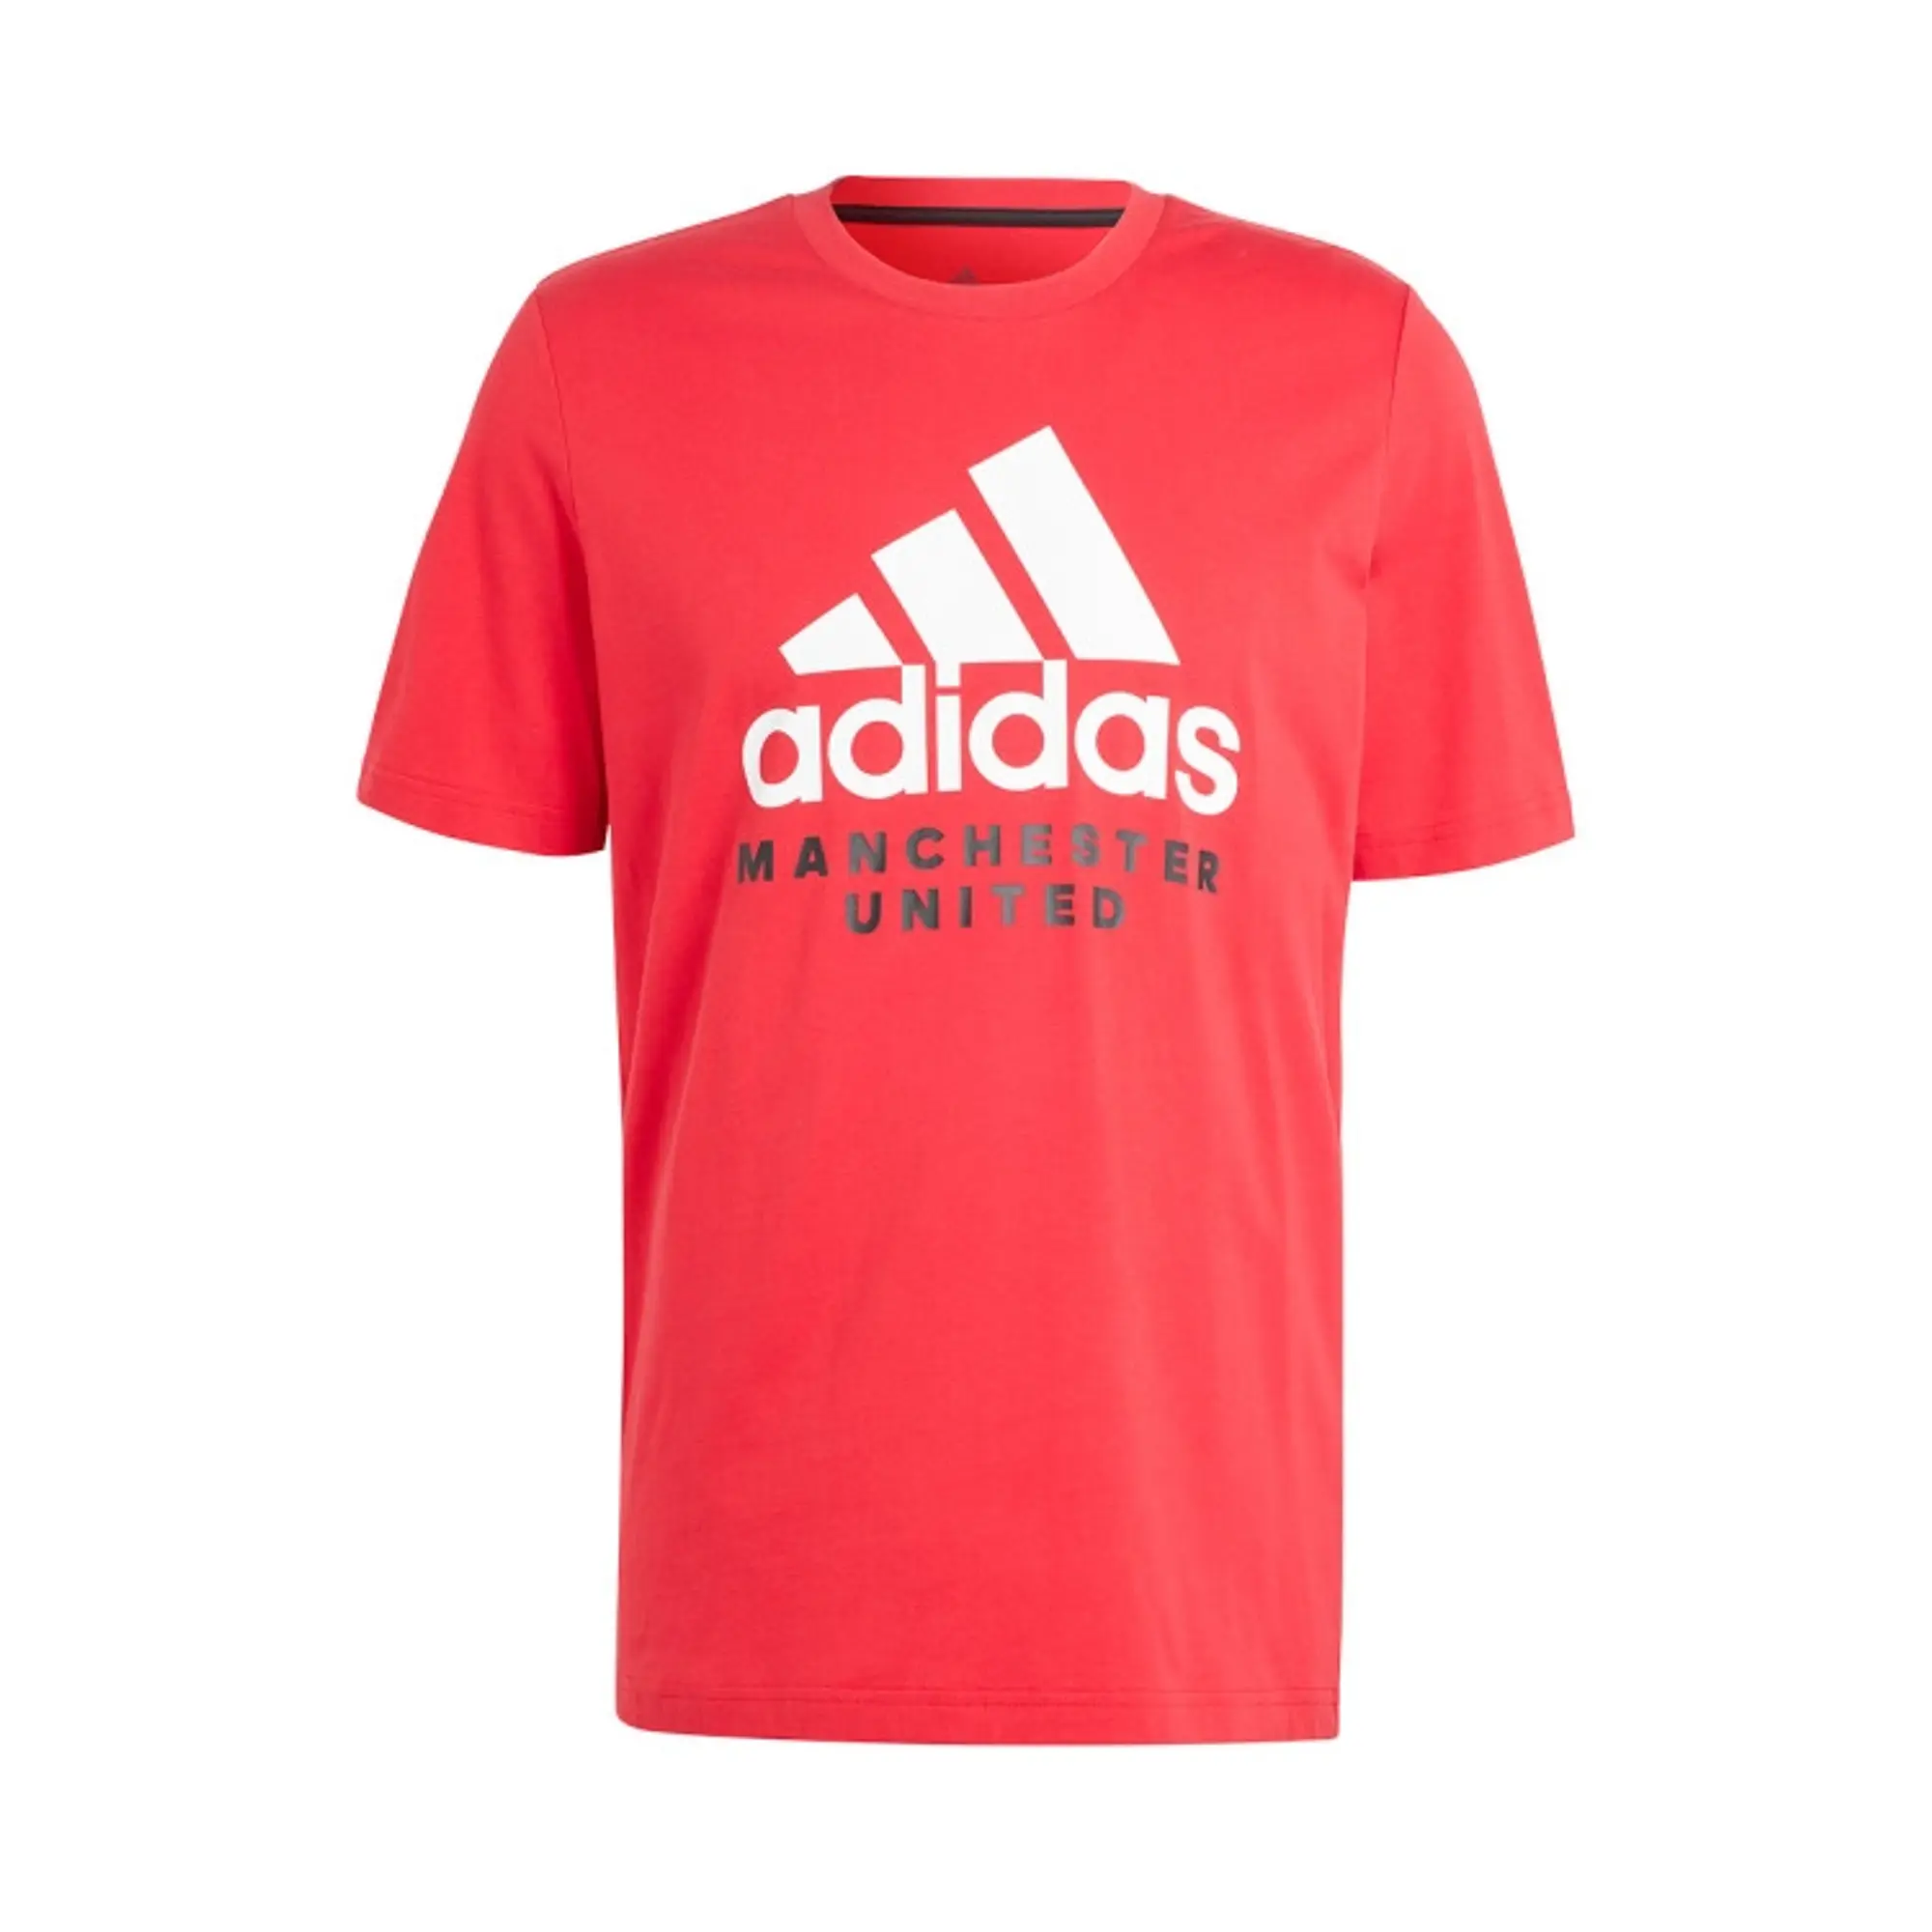 Boys, adidas Adidas Youth Manchester United 23/24 DNA Tee, Red